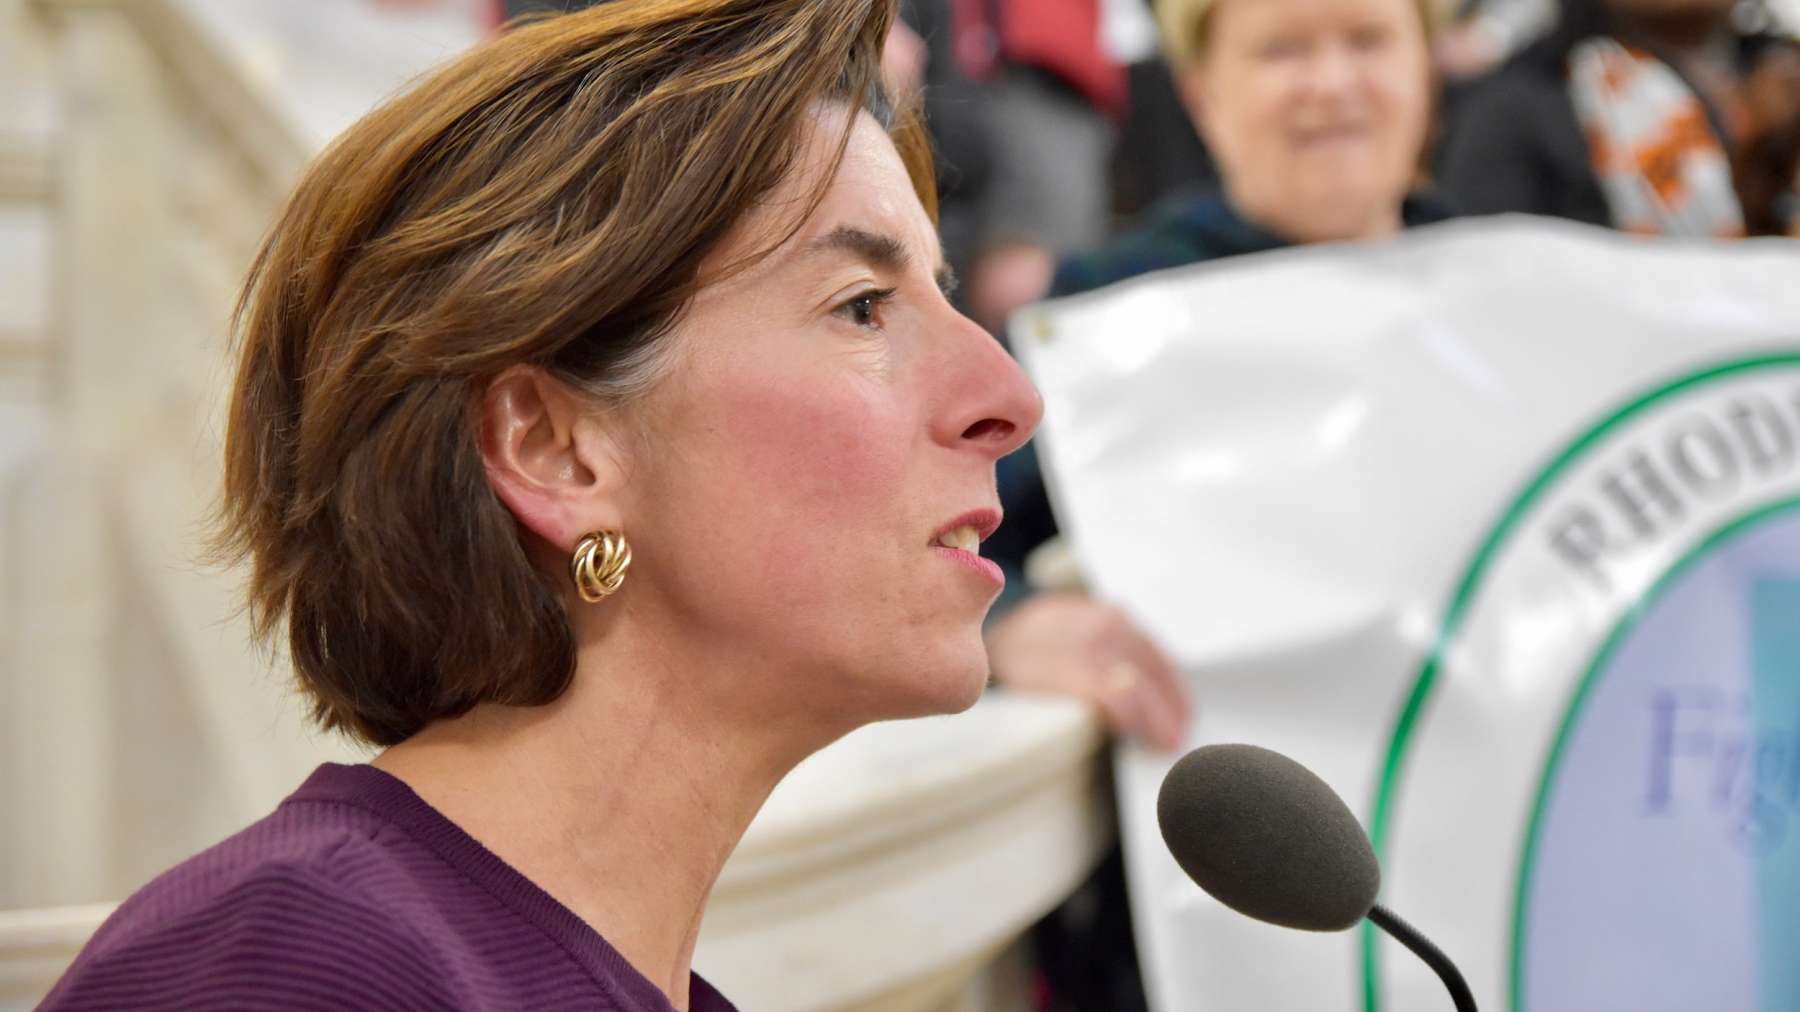 Rhode Island News: Will Governor Raimondo fight for the people or austerity in 2021 Budget?